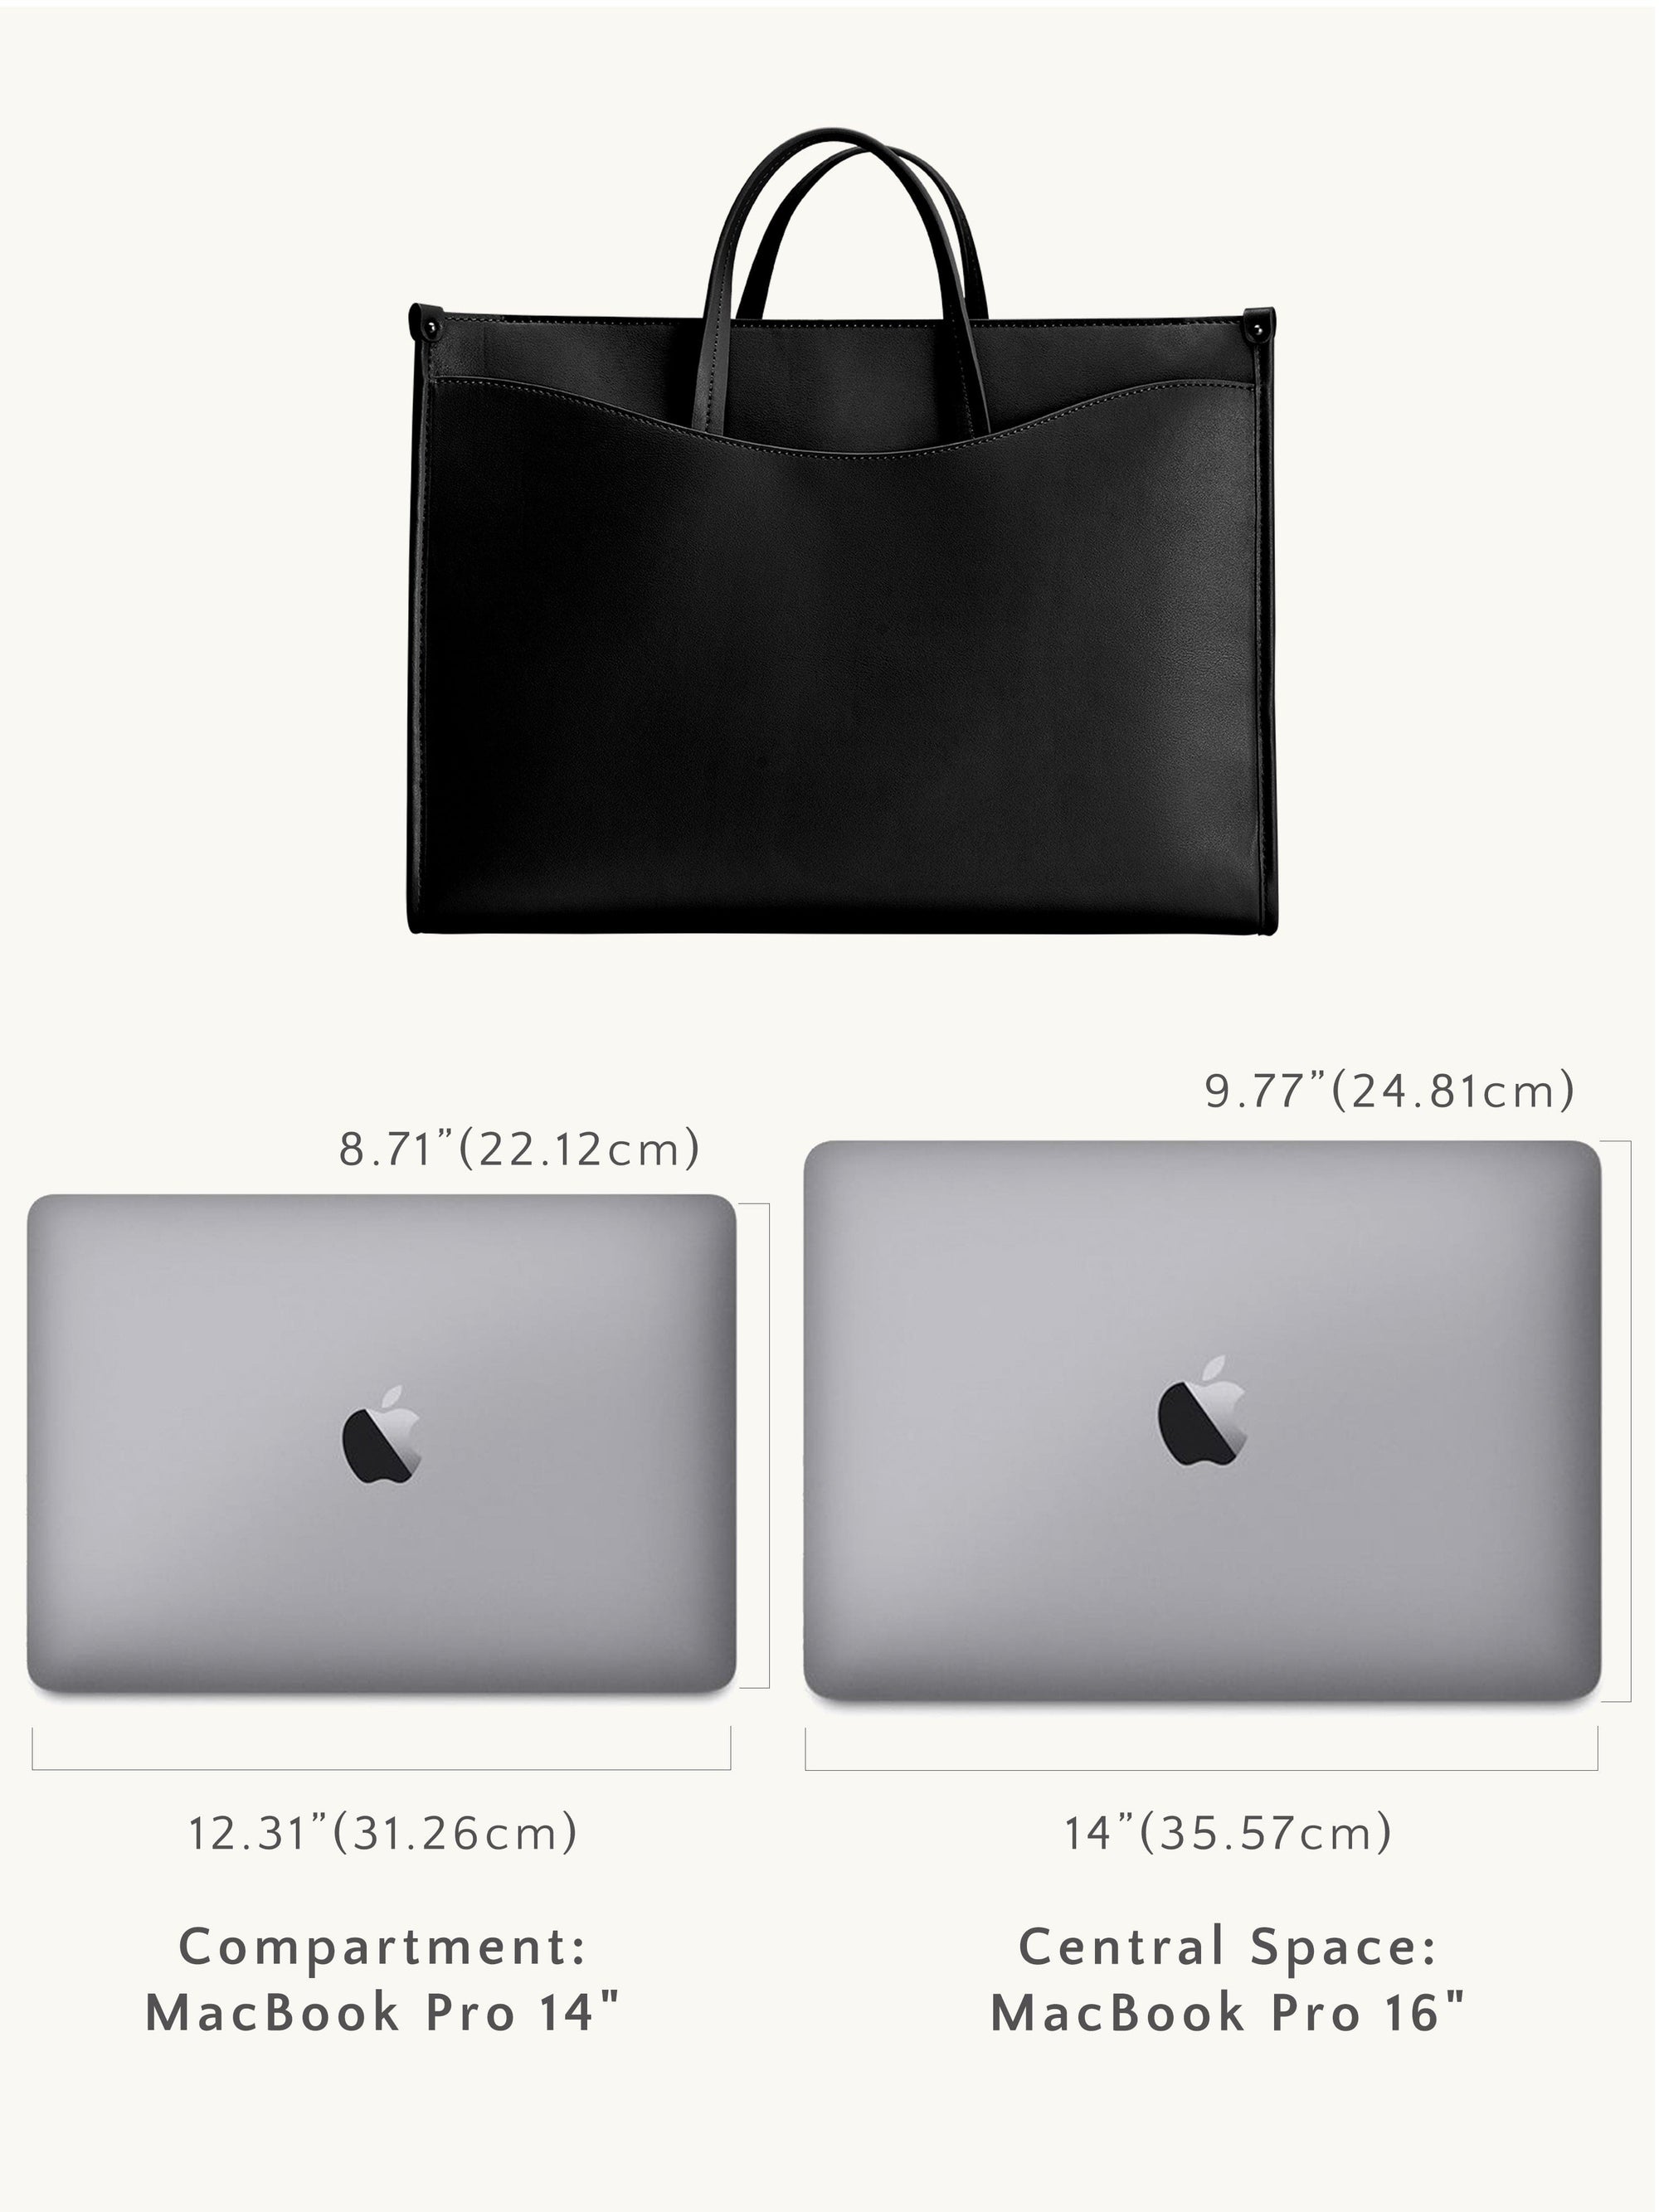 OLEADA Work Tote Bag > Leather Work Tote For Women > Large Capacity Bag > 16 Inch Laptop Bag > Convertible To Shoulder Bag Reverie Tote Onyx